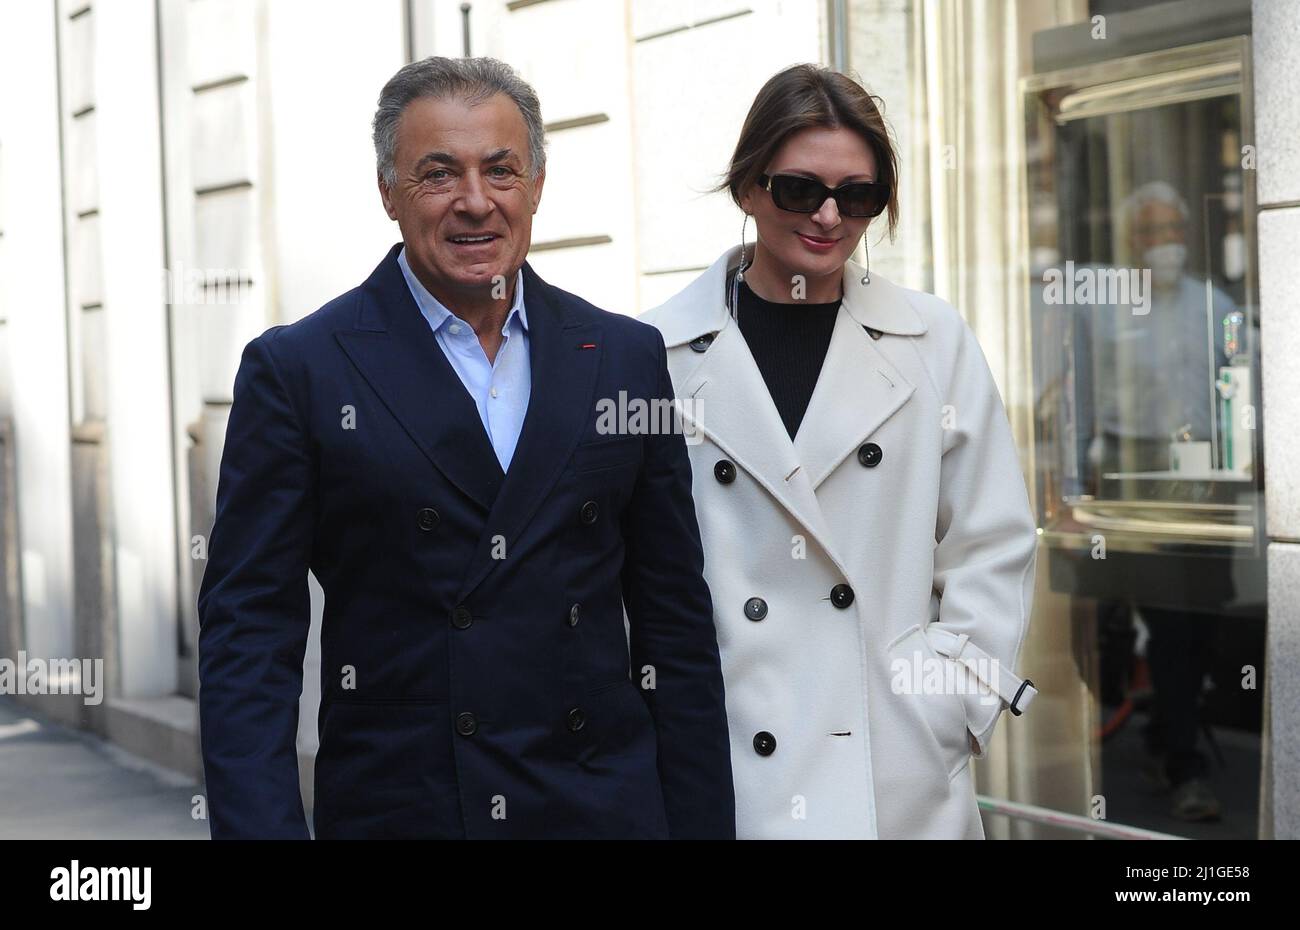 Milan, Italy. 25th Mar, 2022. Milan, 25-03-2022 JEAN ALESI, former formula  1 driver, married to the Japanese actress and model KUMIKO GOTO, with whom  he had 4 children, was today caught walking